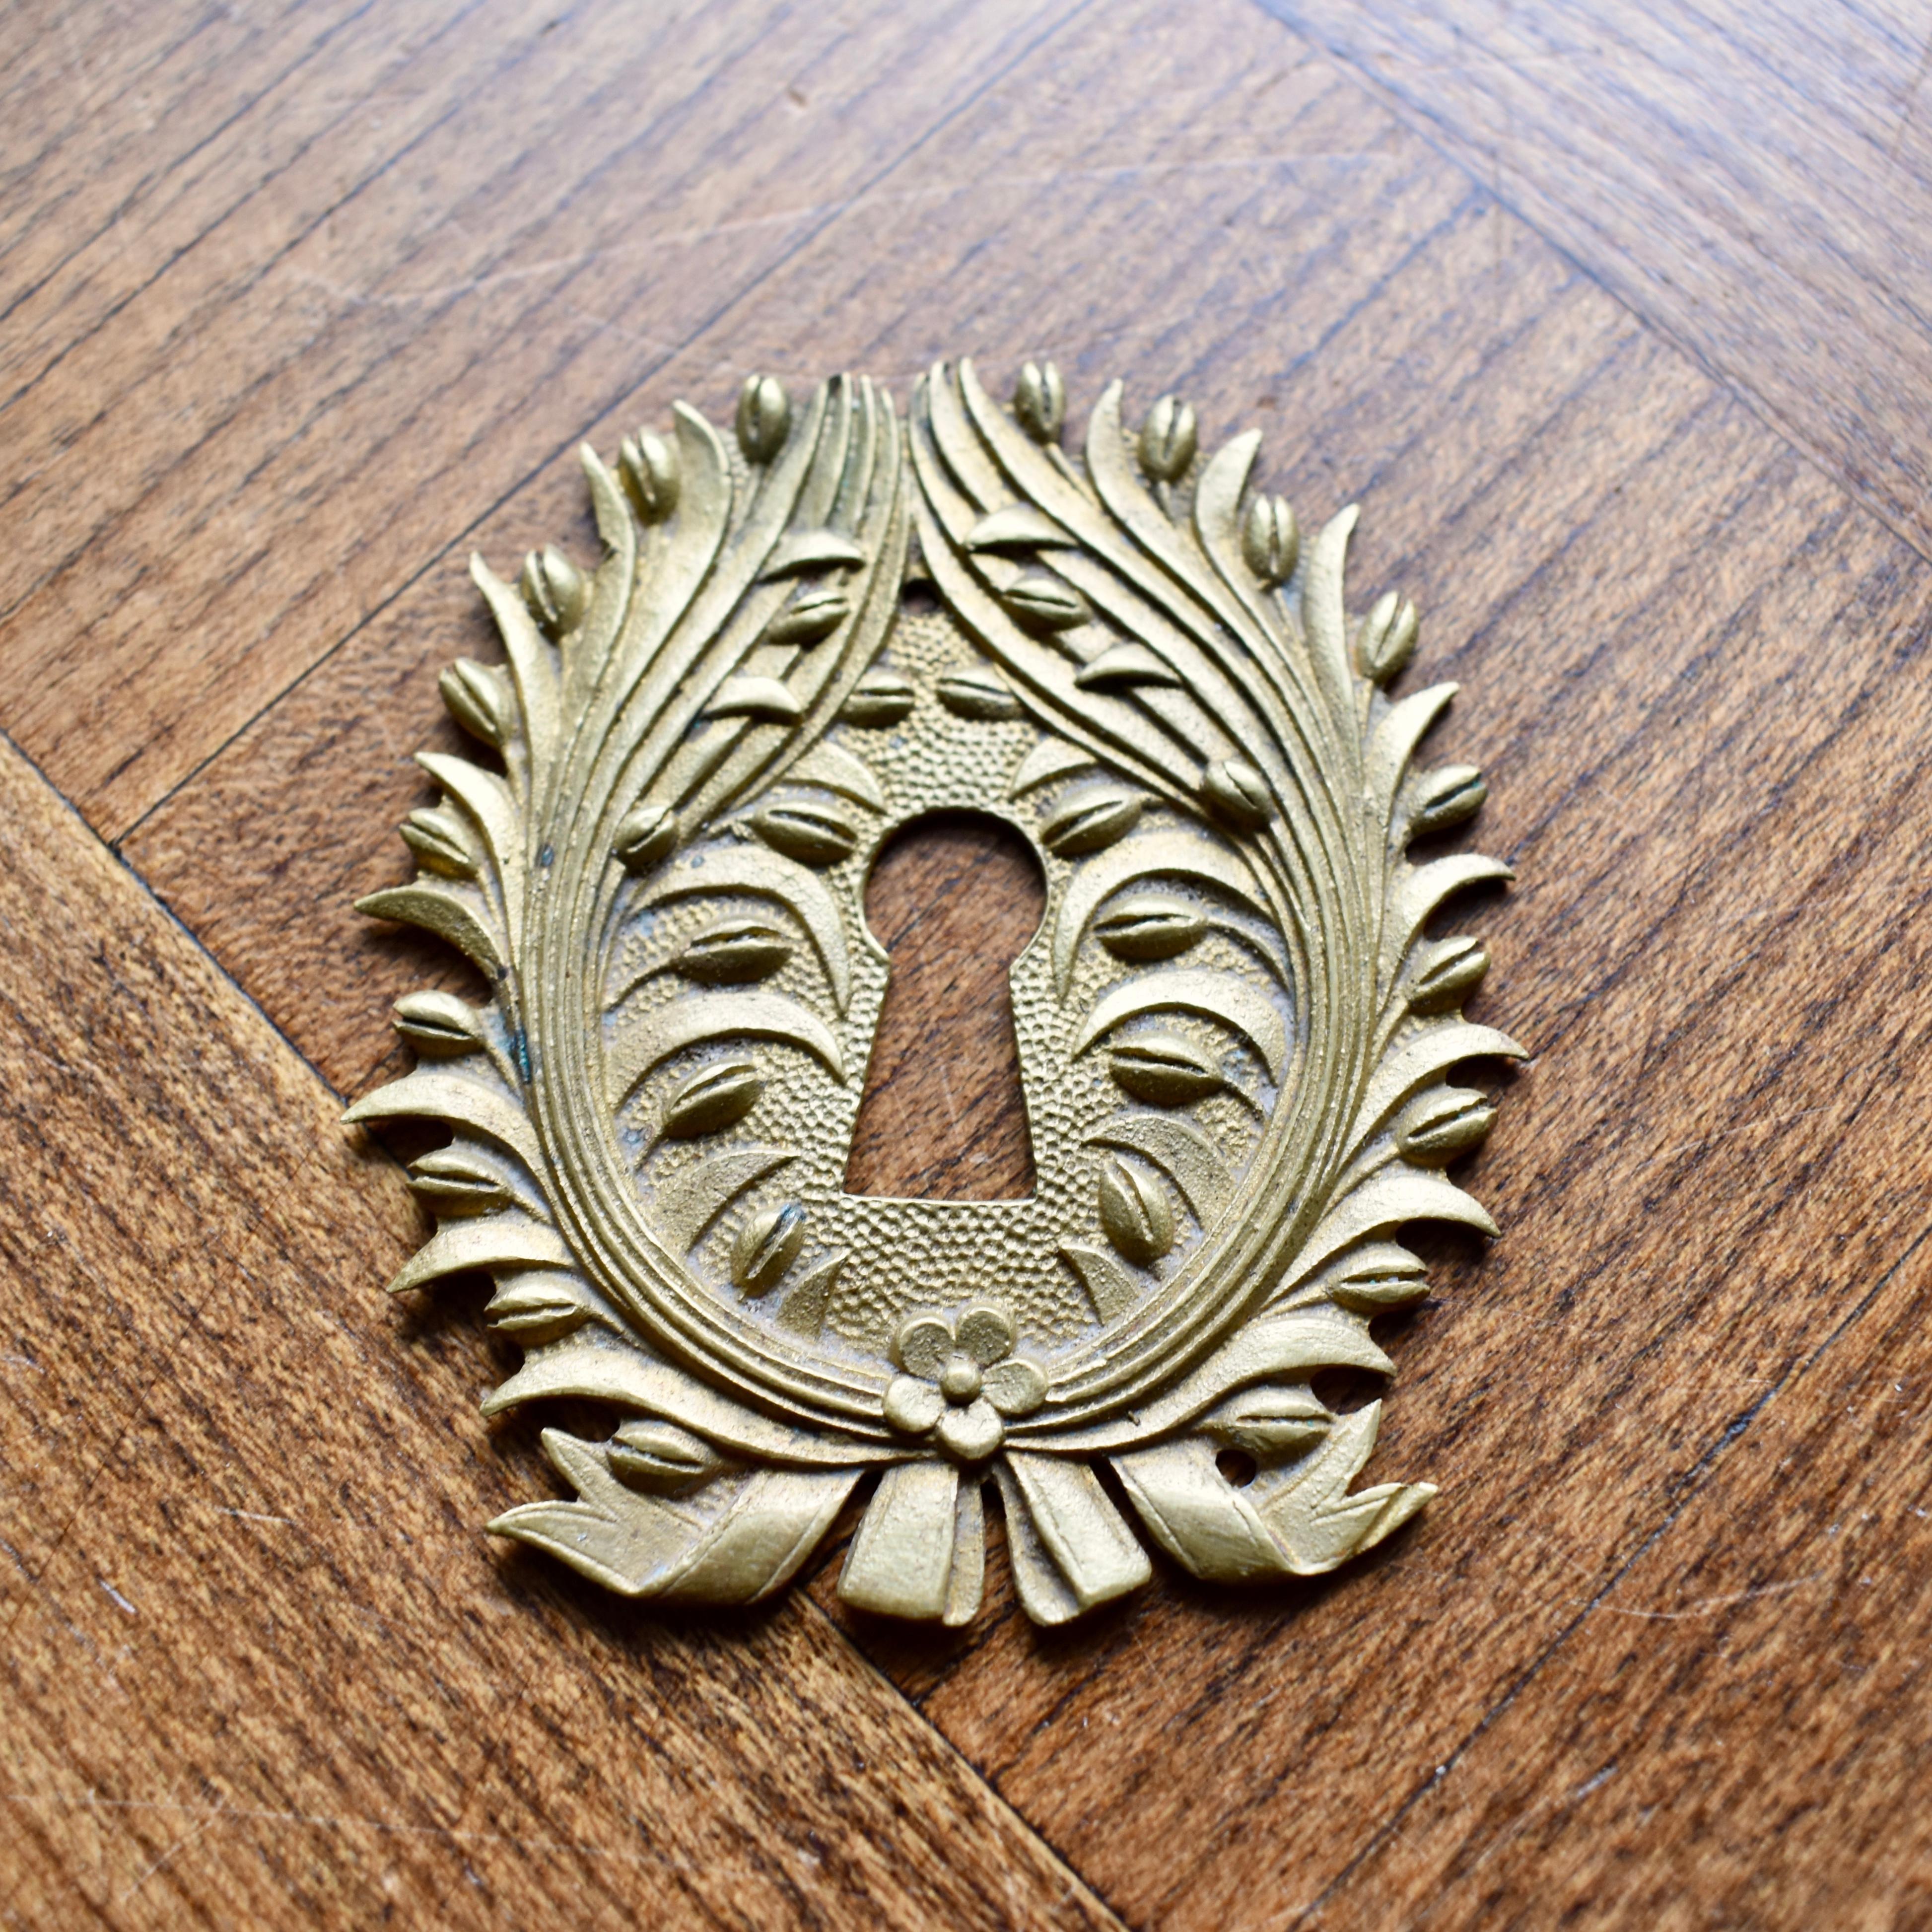 Add an elegant Parisian touch to your decor with this beautiful antique French ormolu, Beaux Arts escutcheon, circa 1900-1910. Designed to cover a keyhole on either a salon door, armoire or writing desk, showing an ornate relief design of a floral